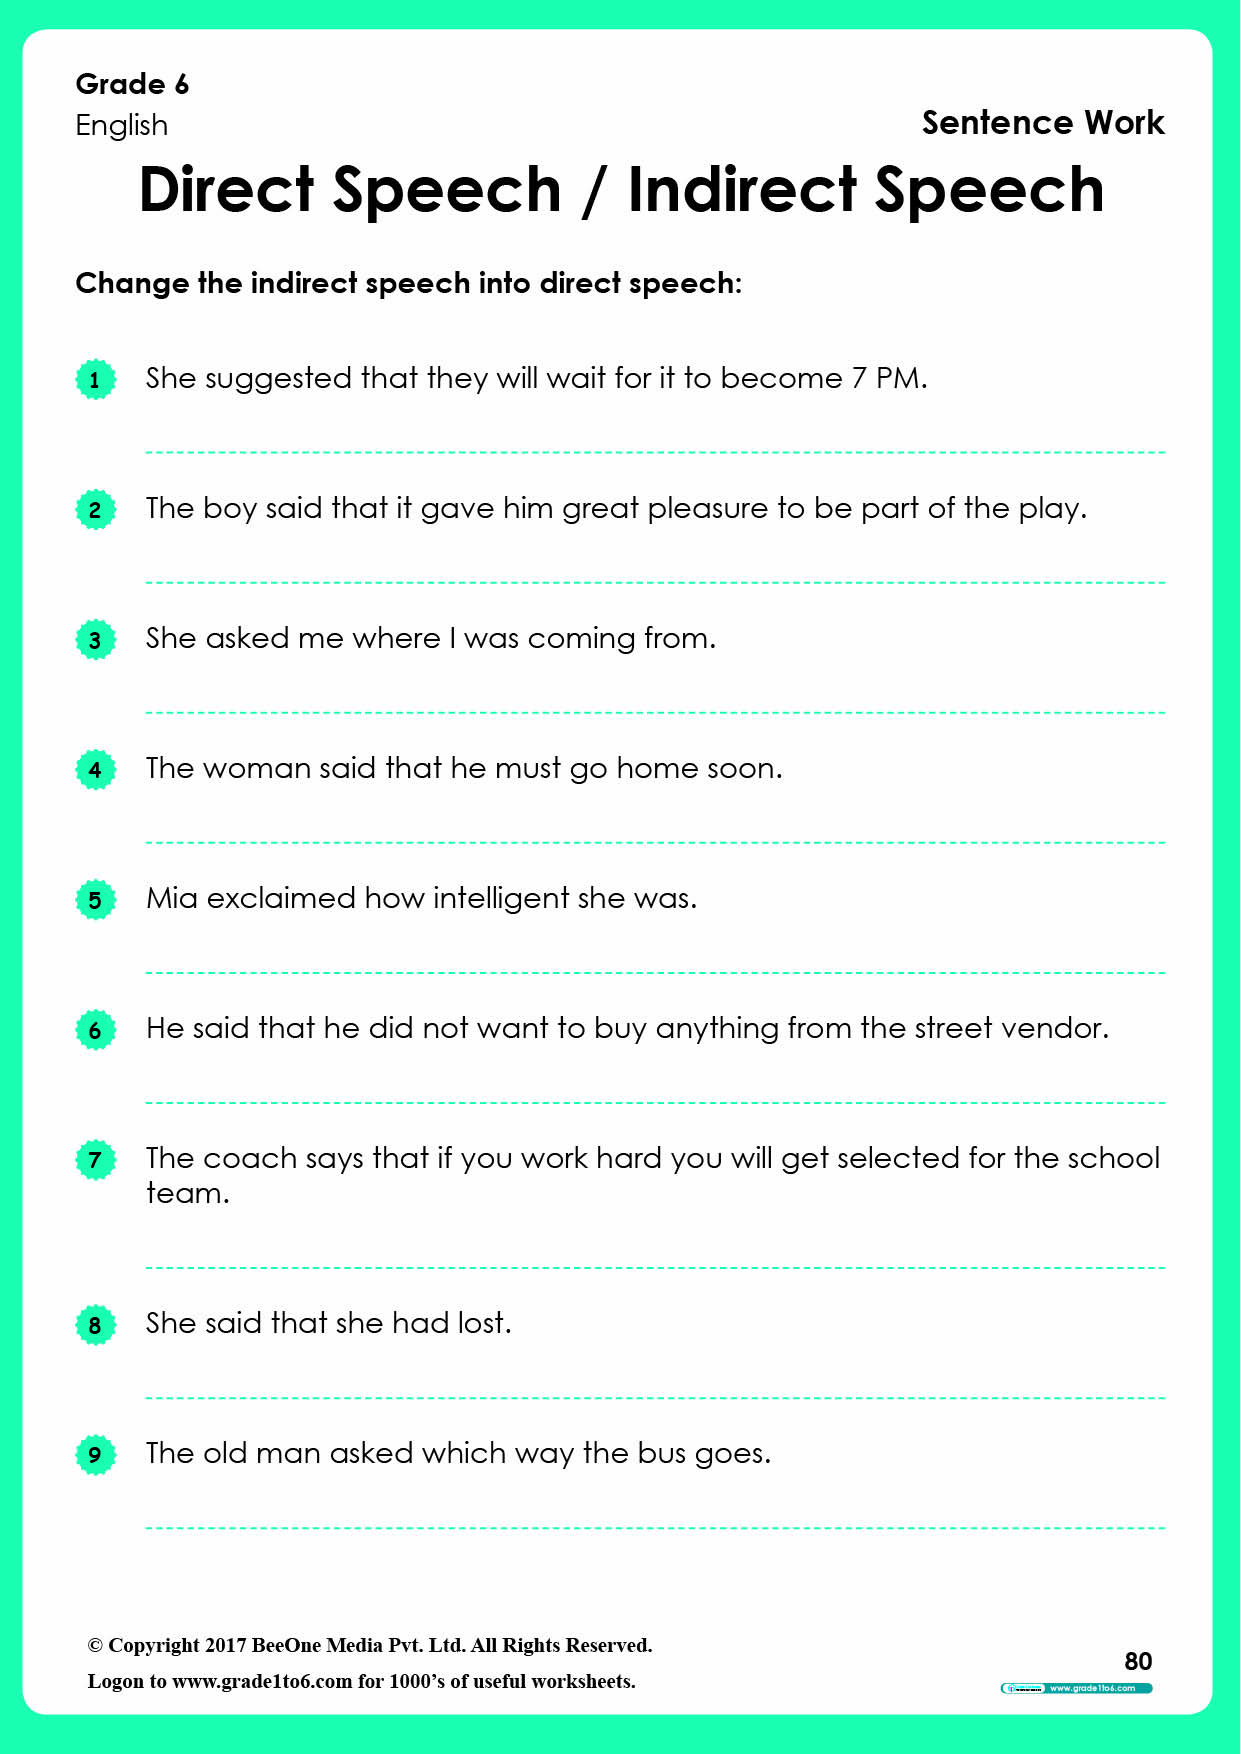 direct and reported speech liveworksheets